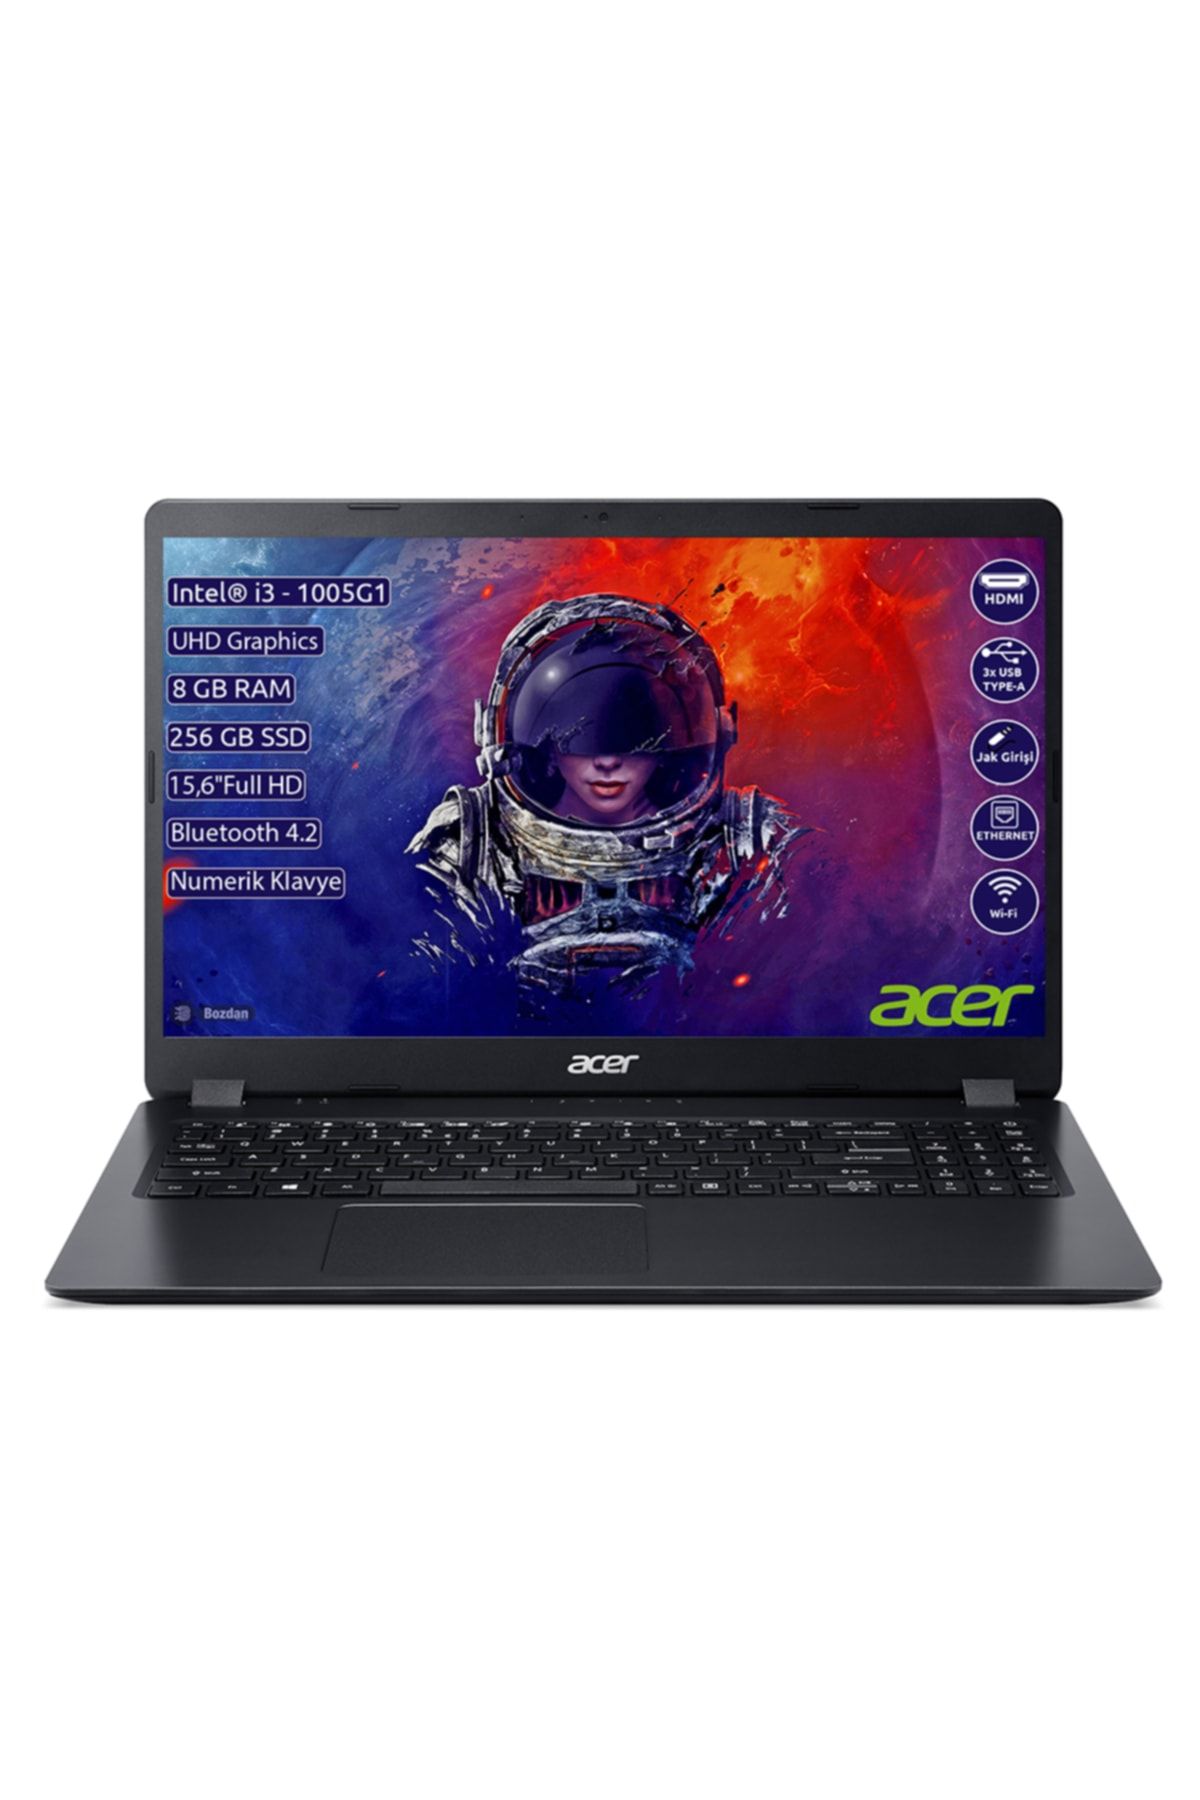 ACER Aspire3 A315-56-327t Intel Core I3 1005g1 8gb 256gb Ssd Freedos 15.6''fhd Notebook Nx.hs5ey.006